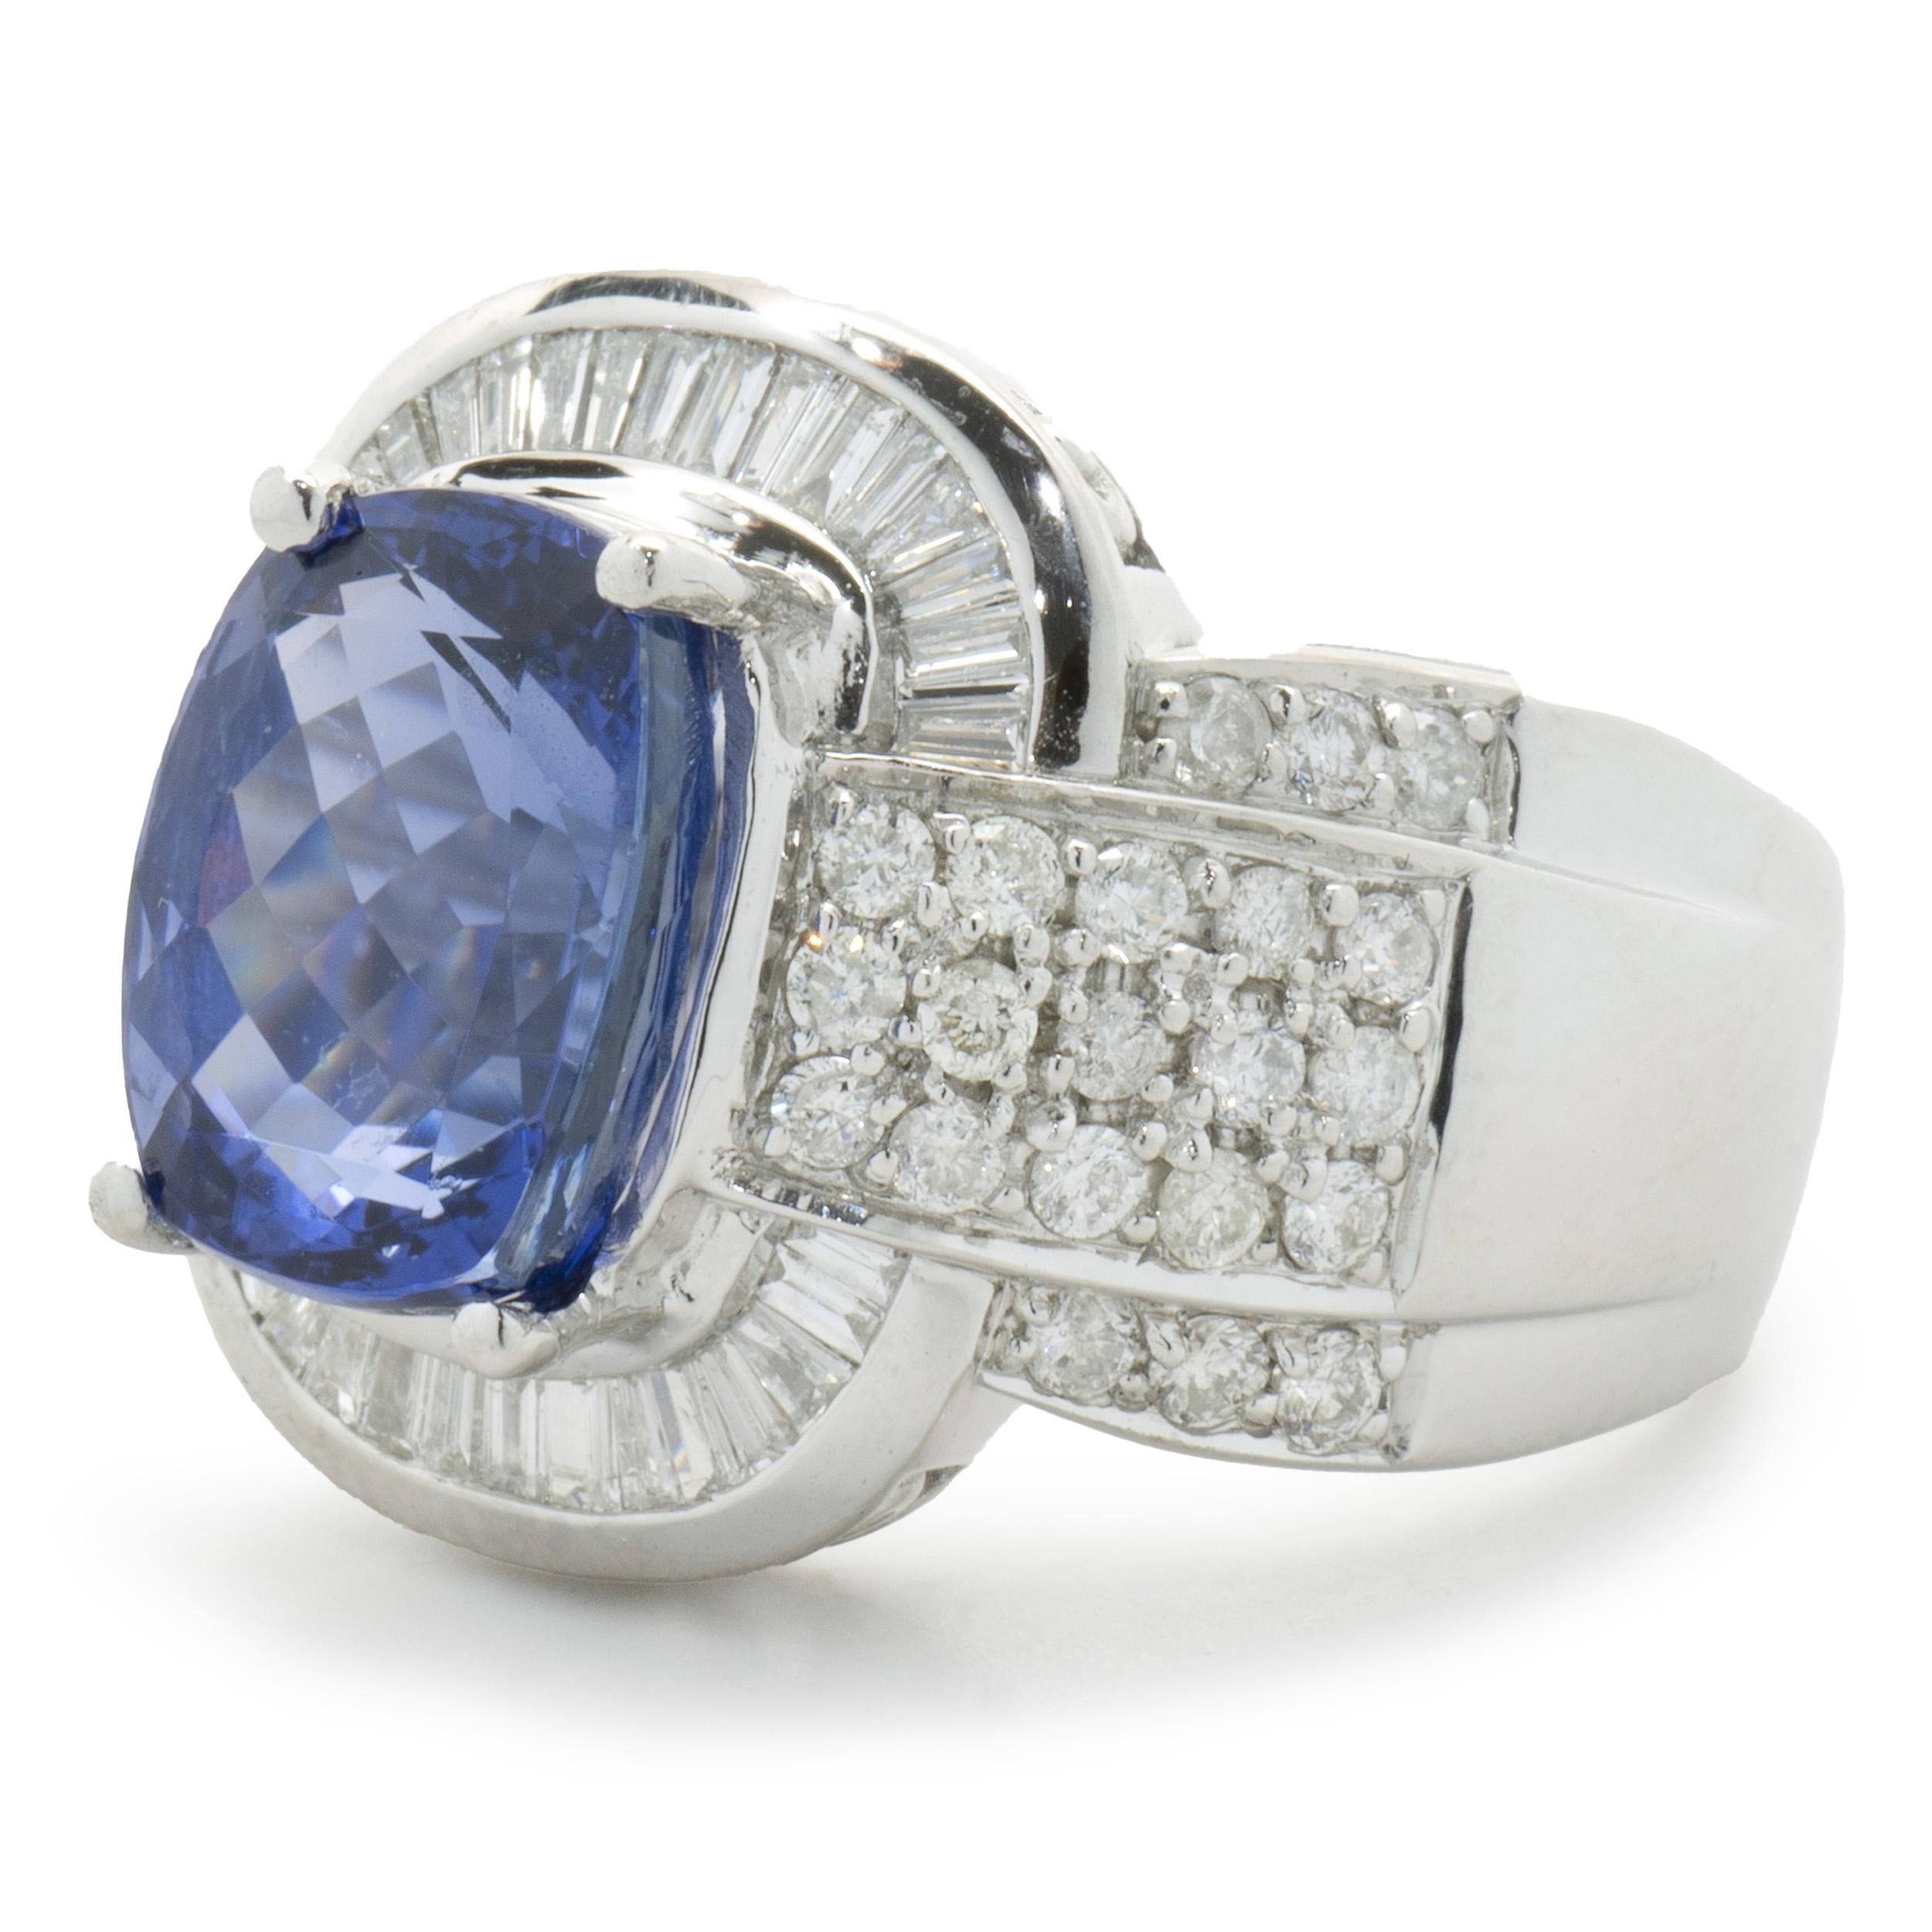 Designer: custom design
Material: 14K white gold
Diamond: 72 round brilliant cut = 1.86cttw
Color: G
Clarity: SI1
Tanzanite: 1 cushion cut = 3.81ct
Dimensions: ring top measures 12mm wide
Ring Size: 7 (please allow two extra shipping days for sizing